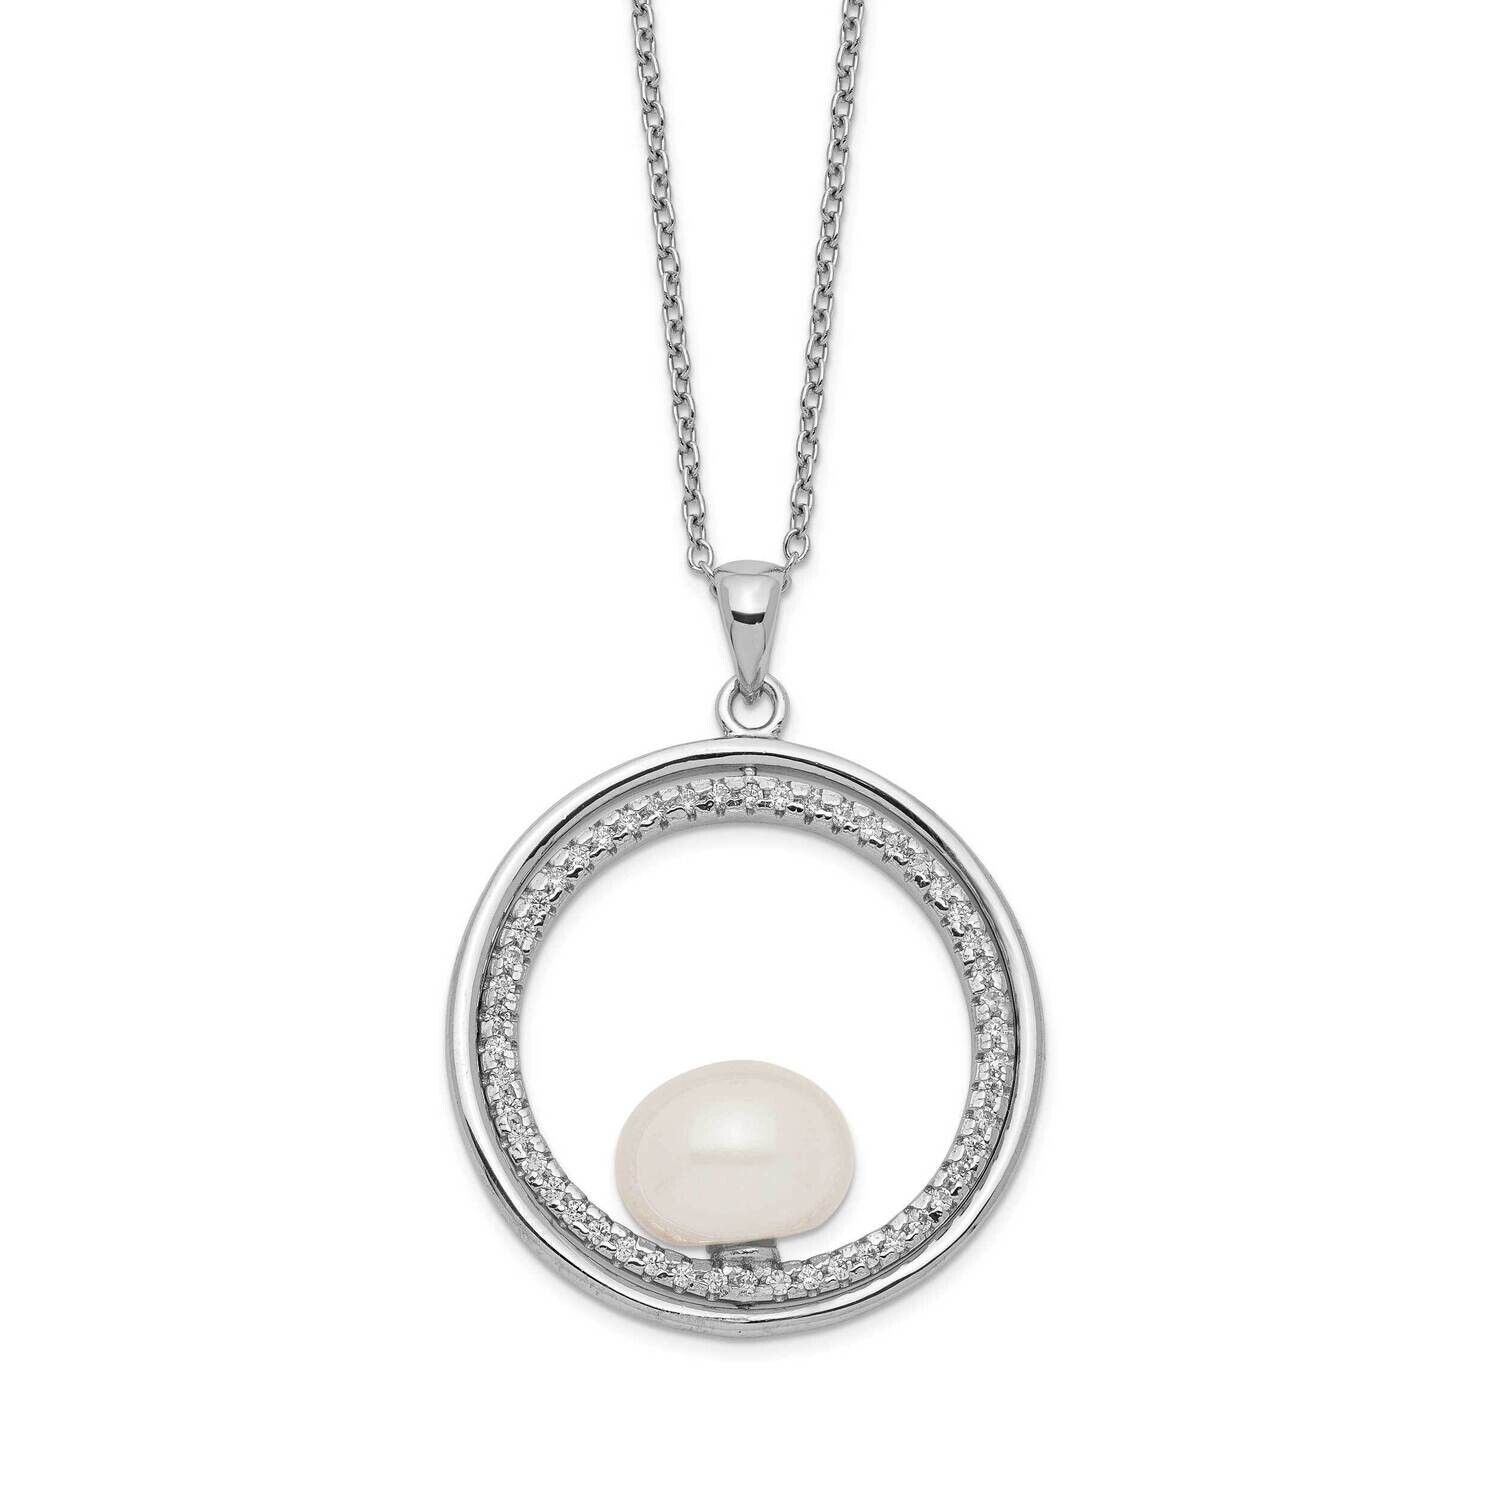 Rhod-Plat 10-11mm White Button Fwc Pearl CZ Necklace Sterling Silver QH5542-18